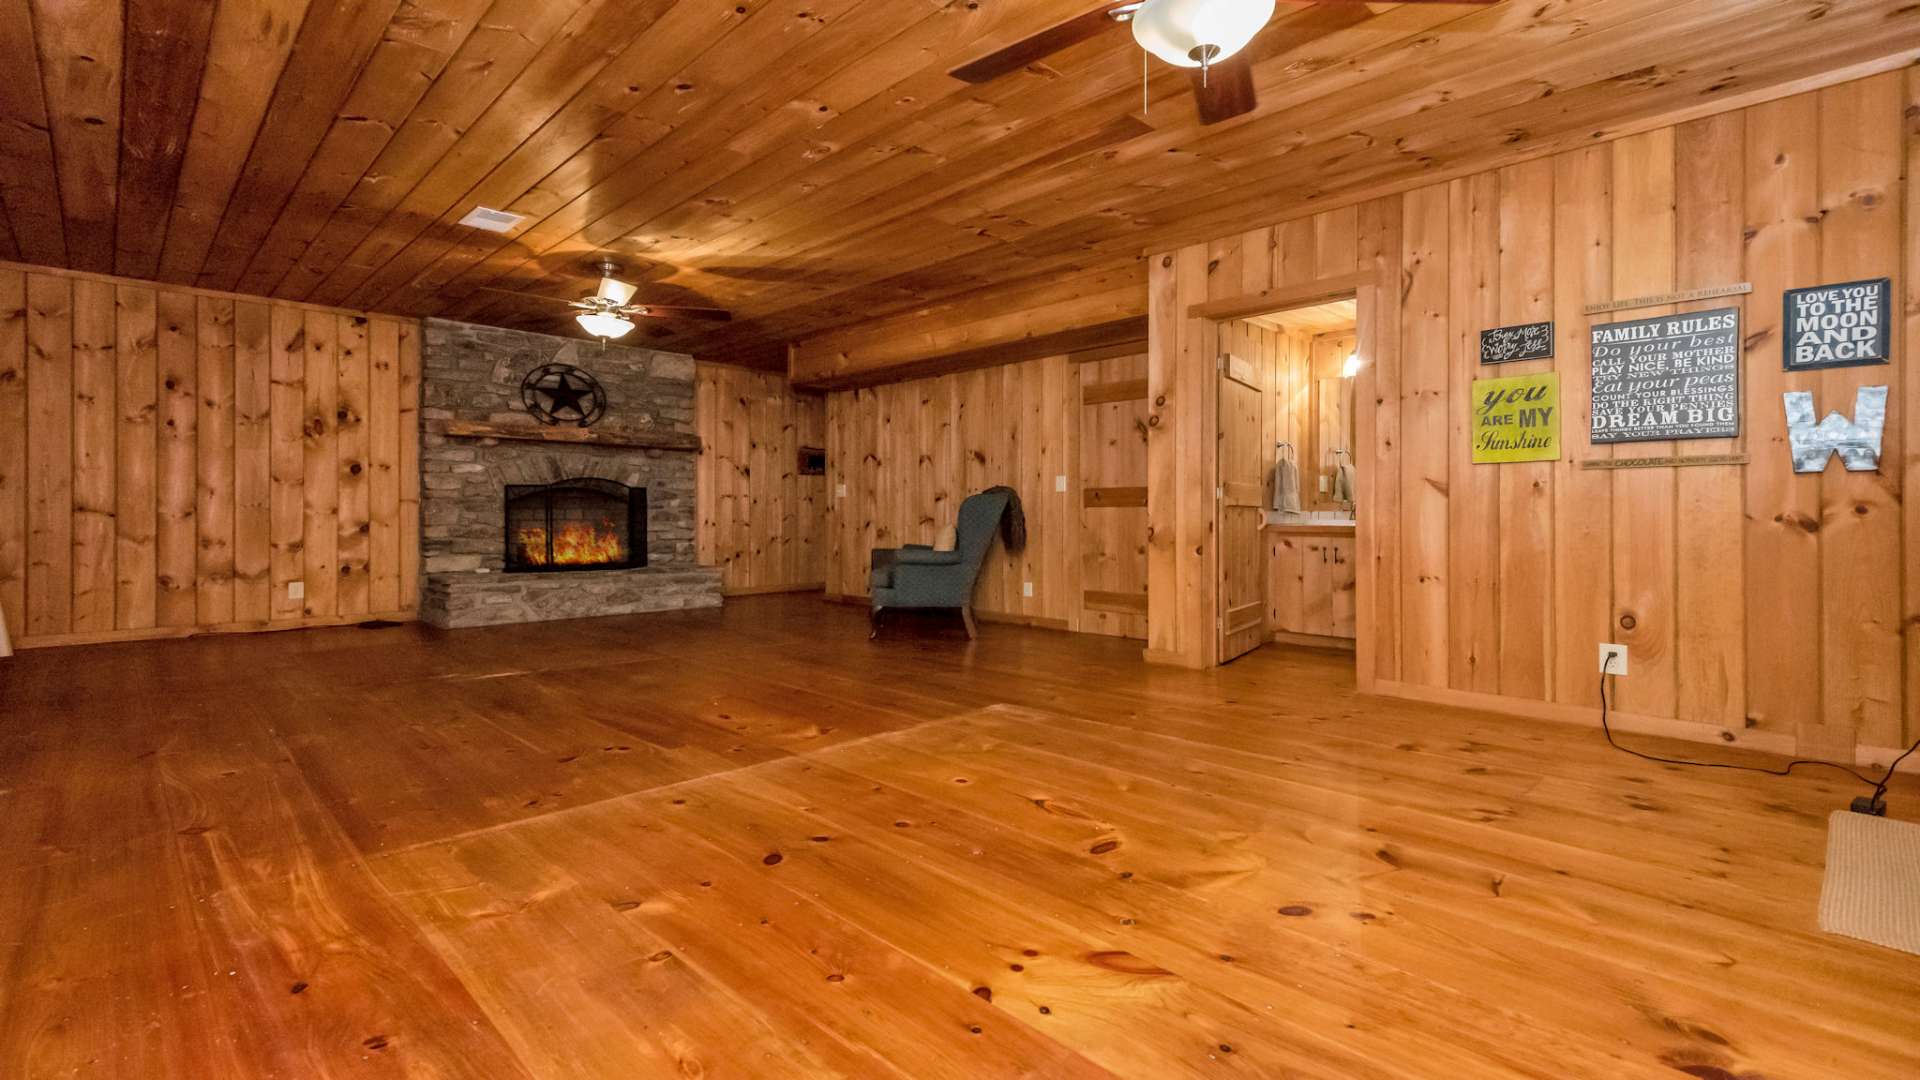 The lower level family room features an additional stone fireplace to keep the lodge vibe flowing.